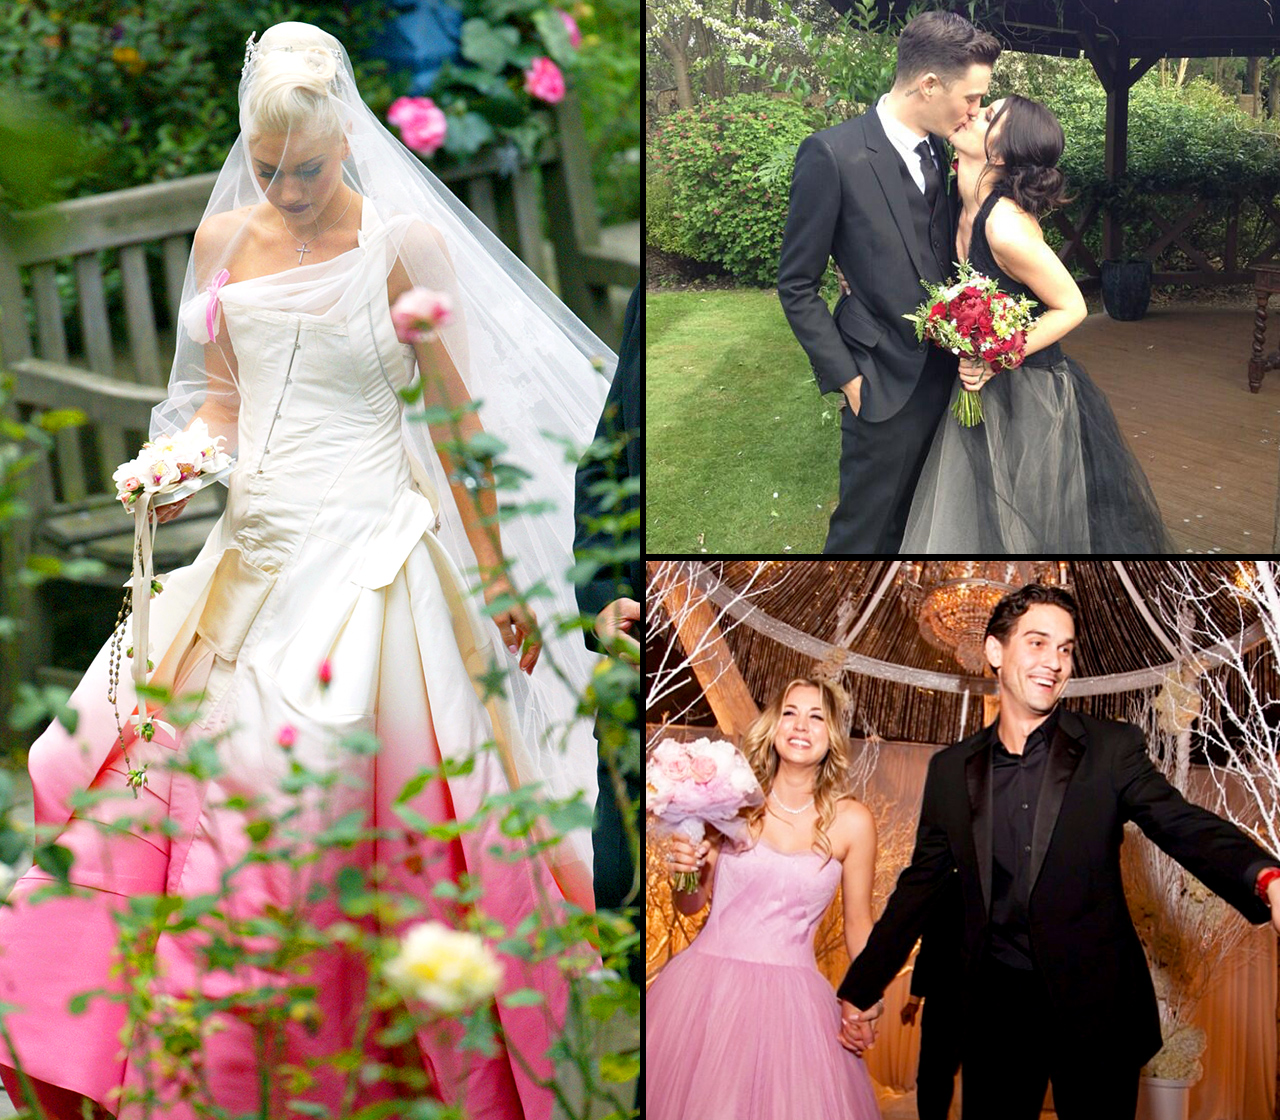 Who What Wear - CELEB WEDDING ALERT!! We can't get over how